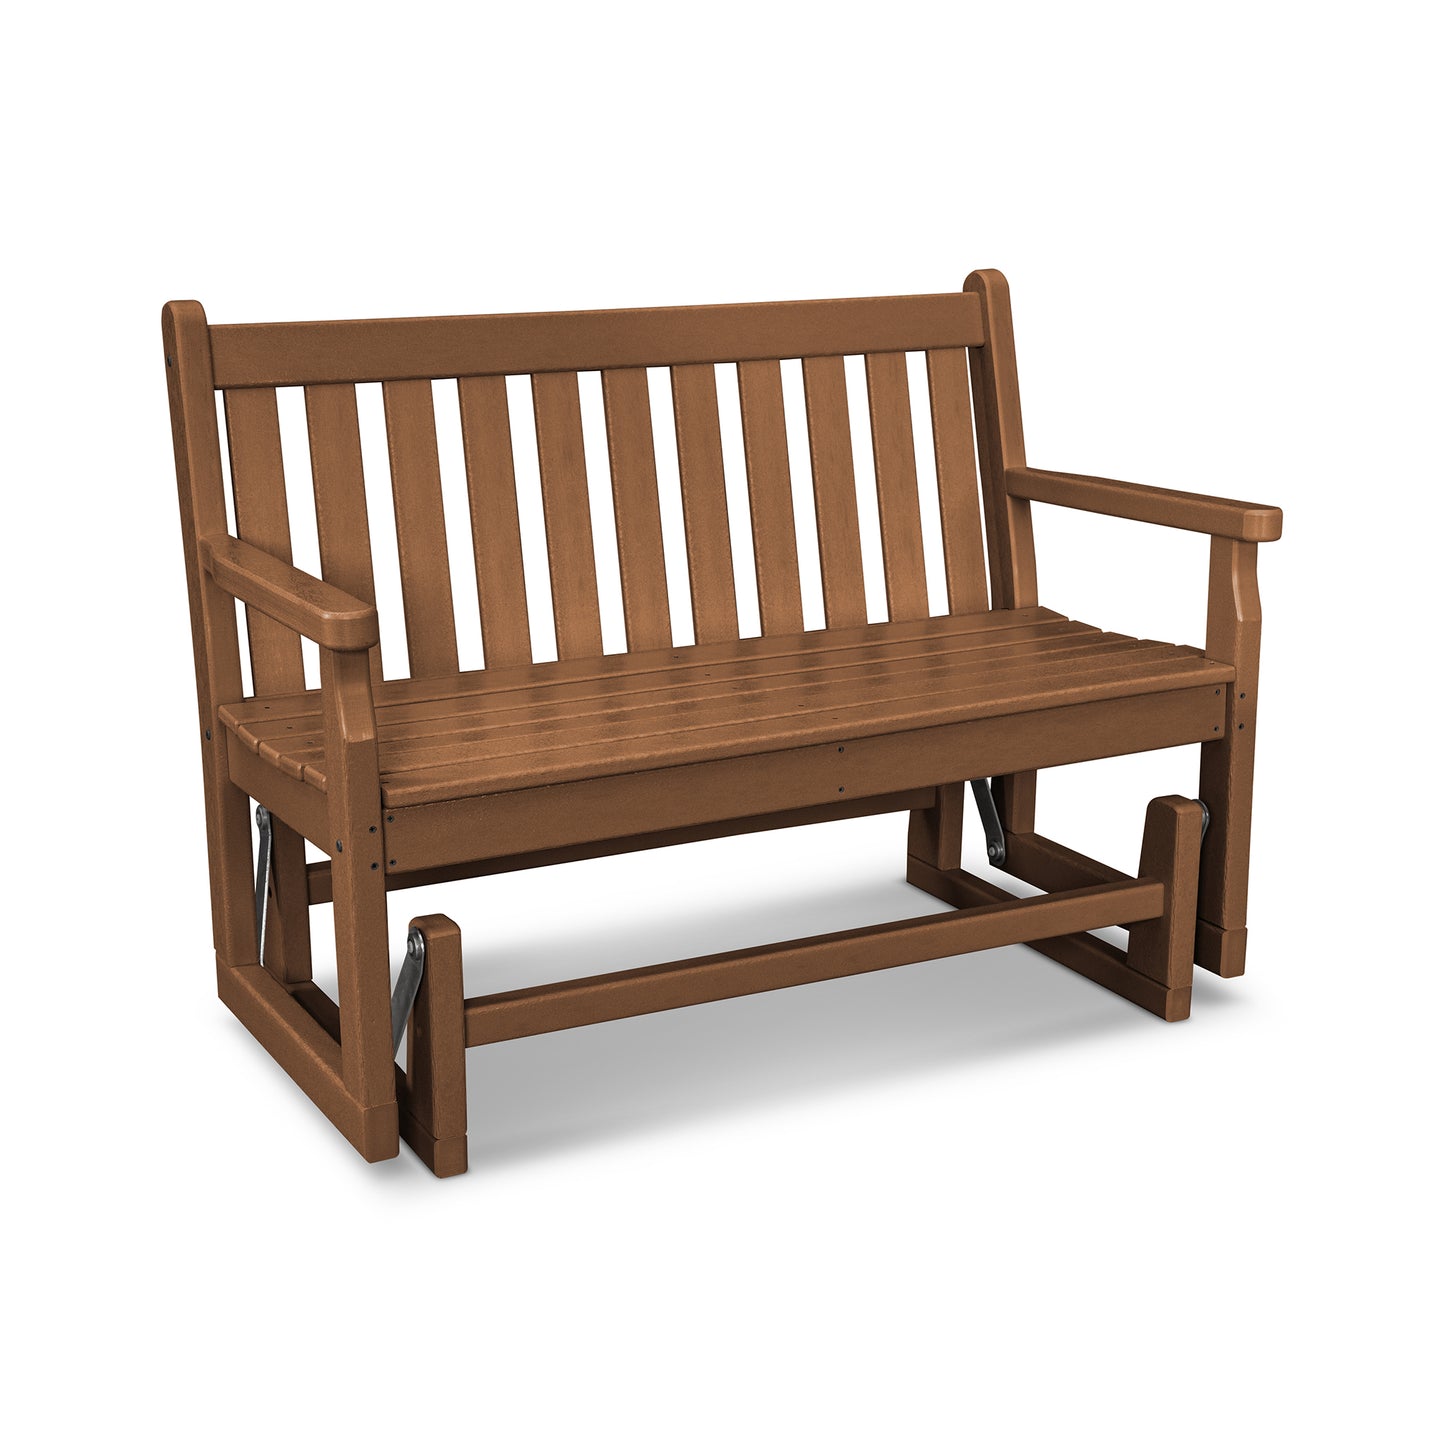 A traditional POLYWOOD Traditional Garden 48" Glider Bench with straight slats and armrests on a white background, showcasing a sturdy design ideal for outdoor use.